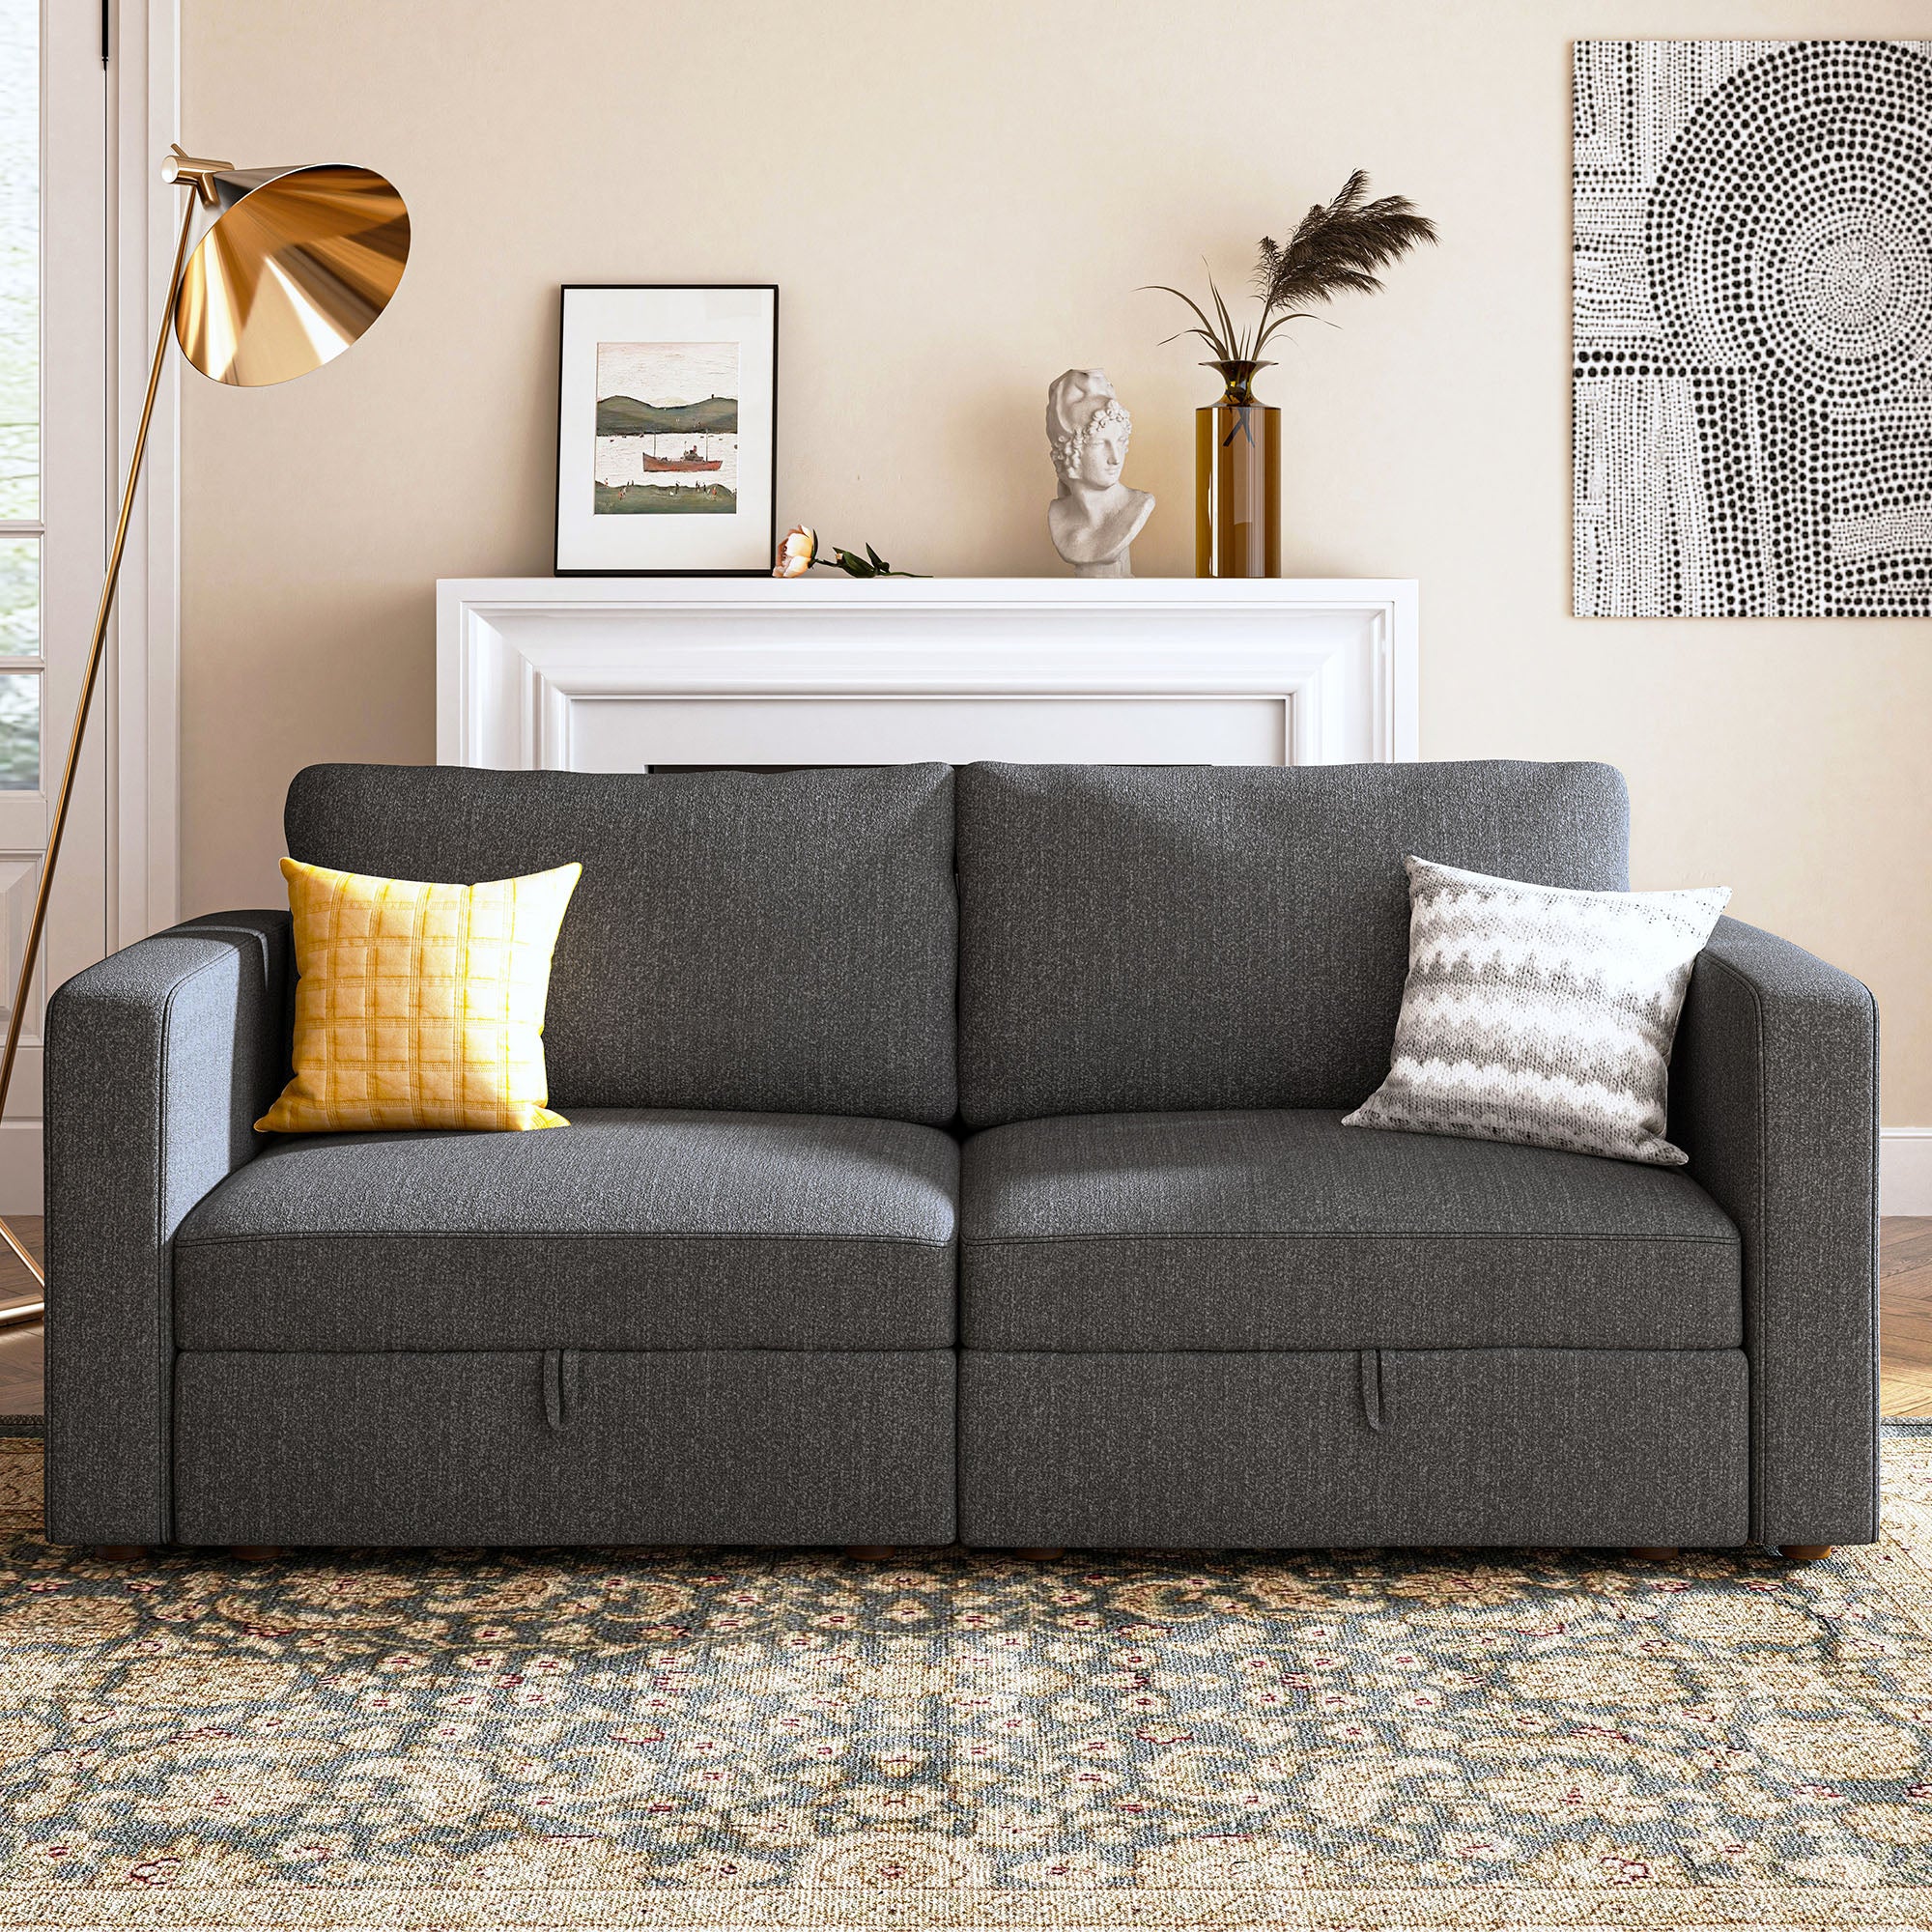 HONBAY Polyester Modular Loveseat Sofa with Storage Space for Living Room